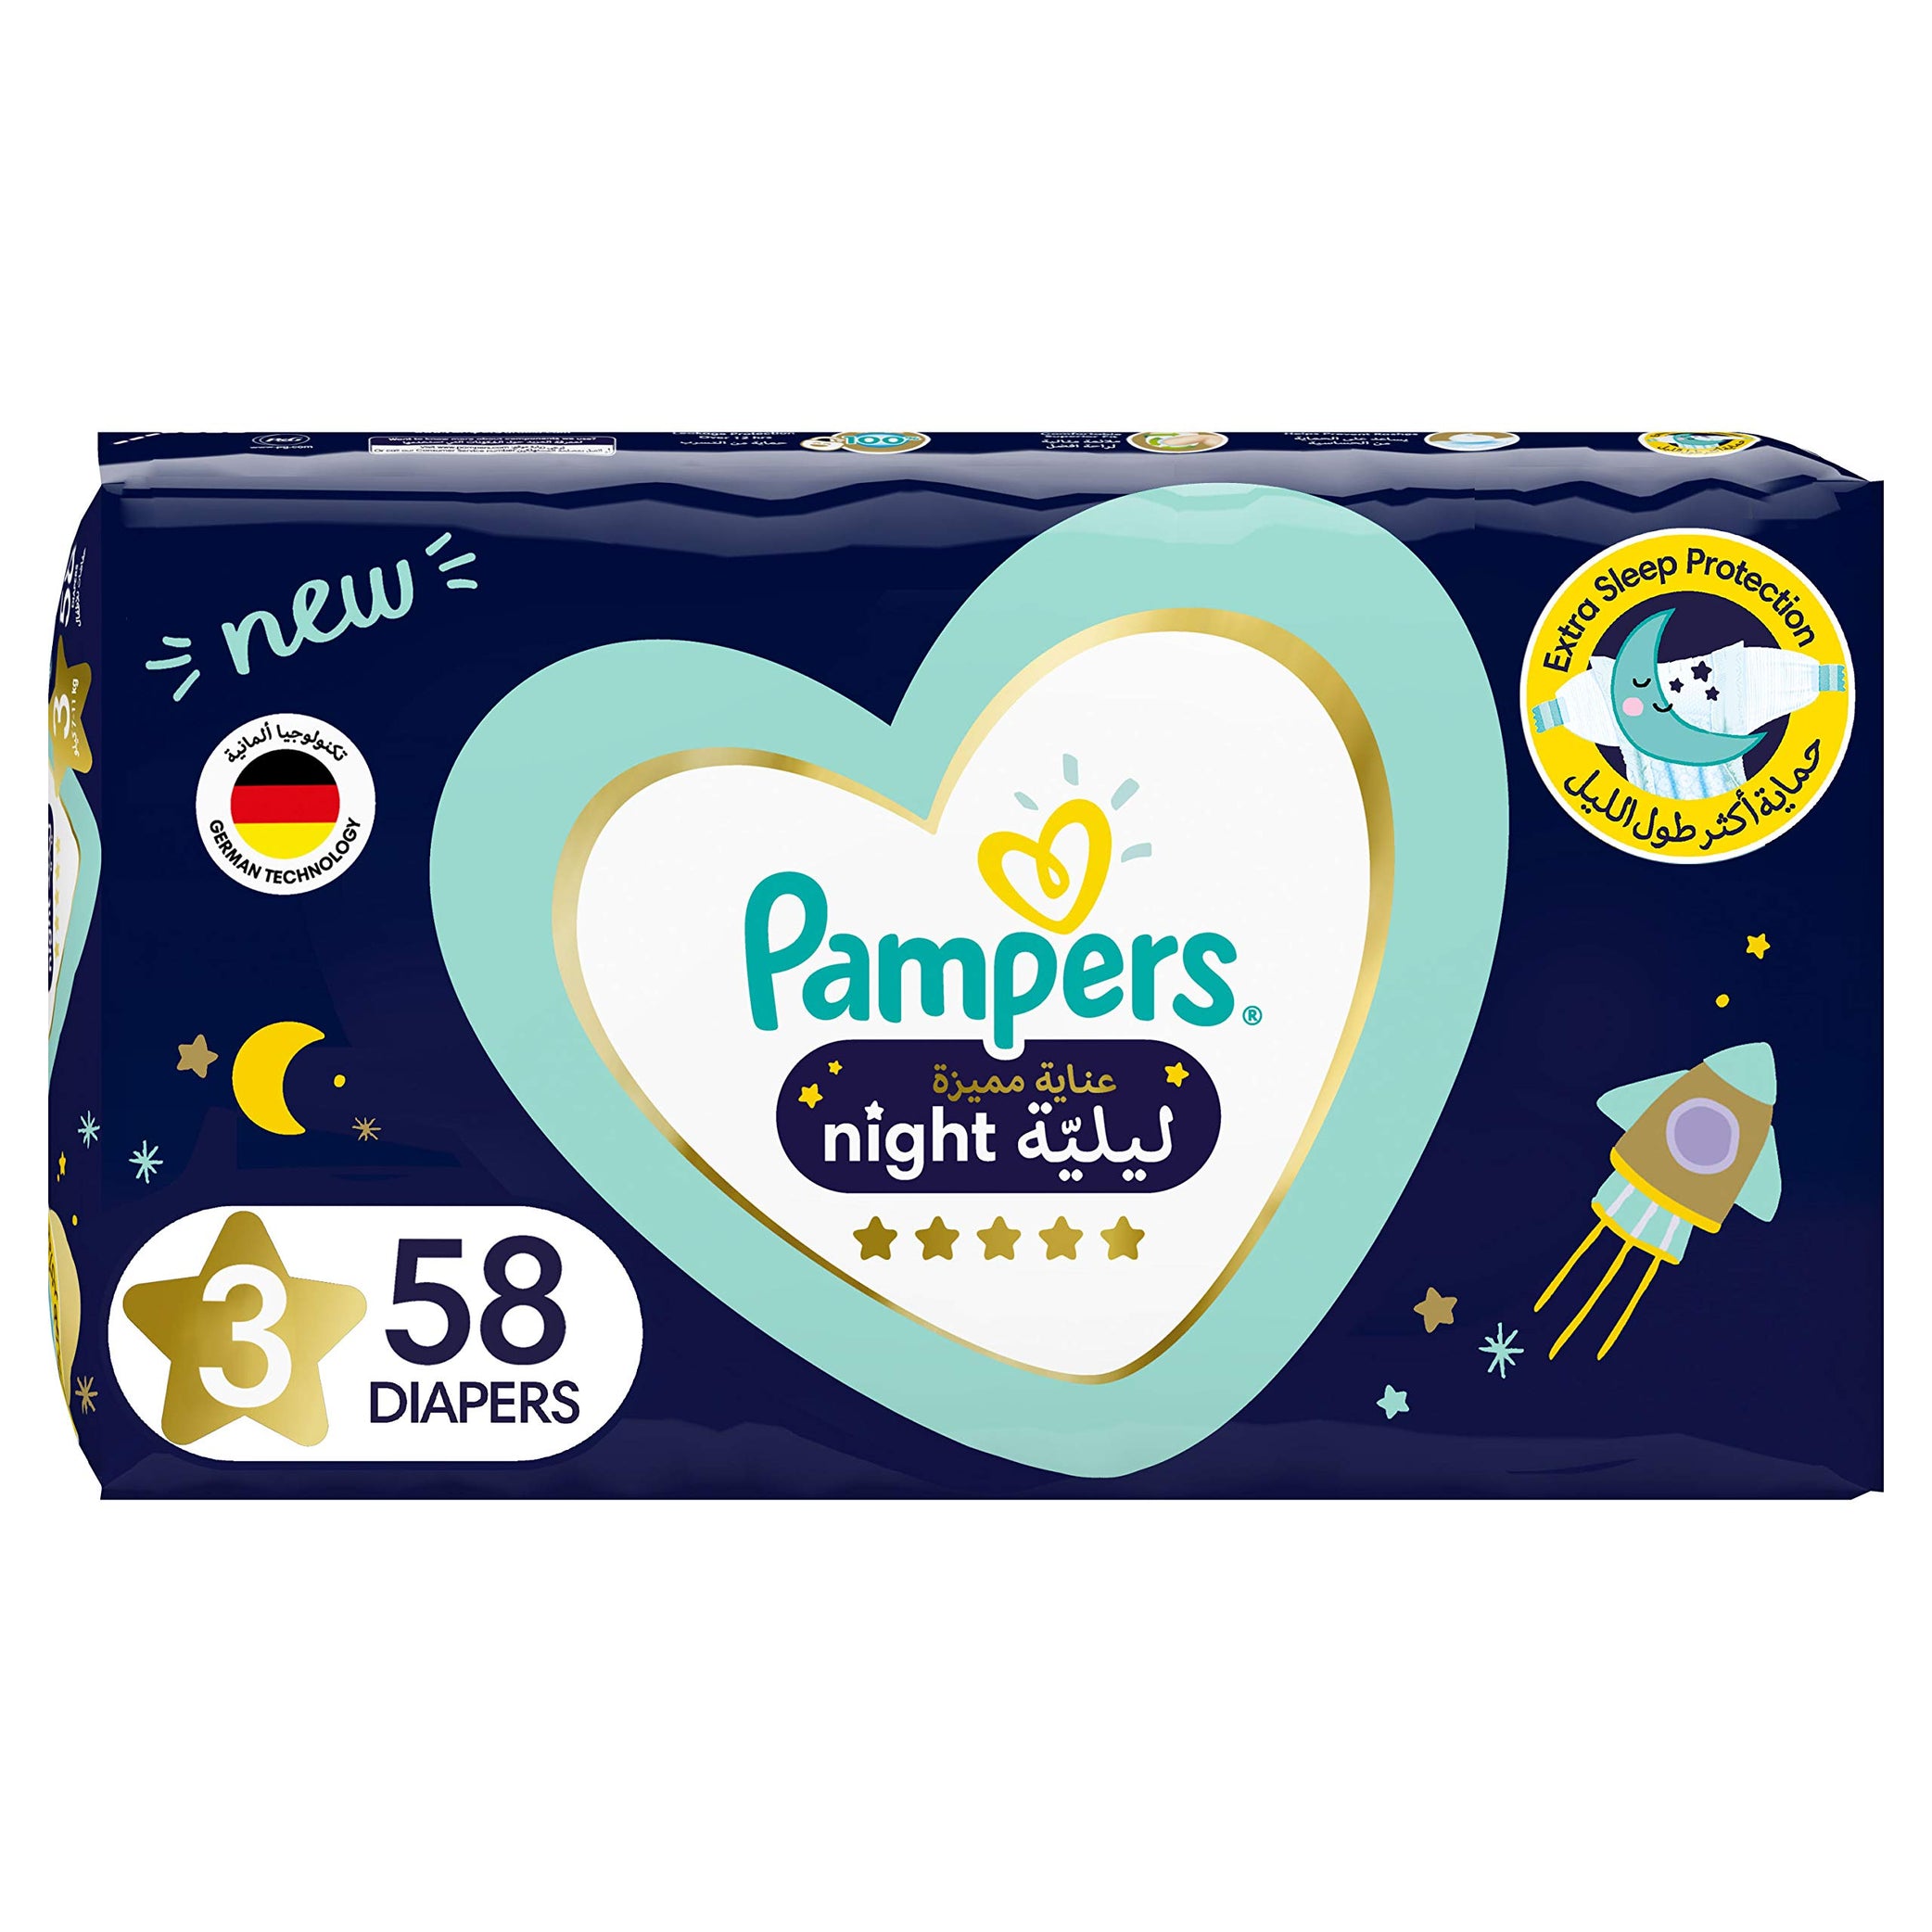 Pampers Premium Care Extra Sleep Protection Night Diapers Size 3 7-11kg 58 Diaper Count